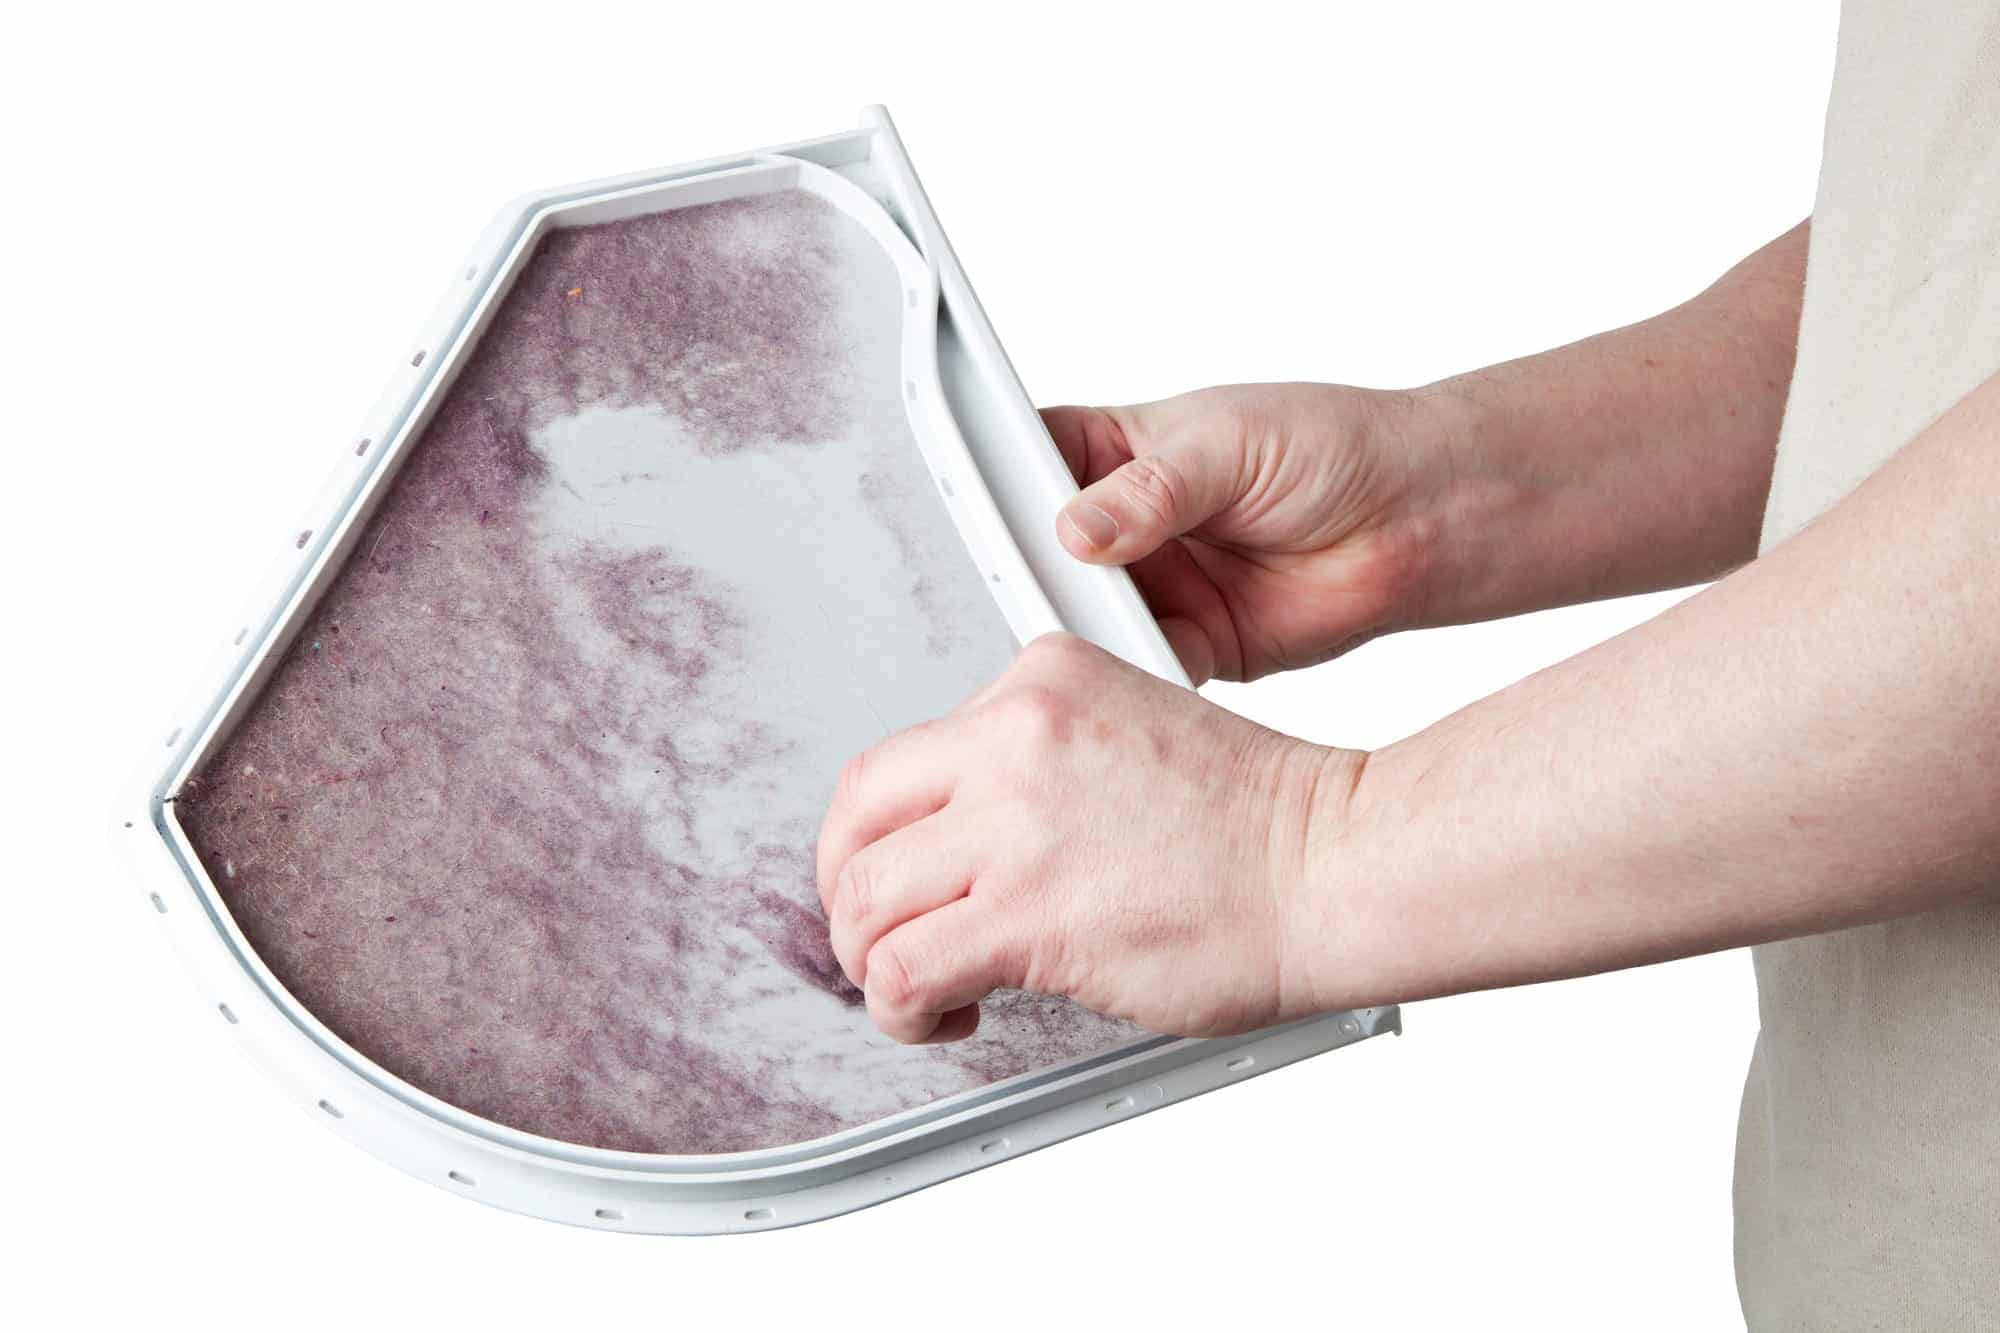 How to clean the lint trap in a dryer - Sparkling and Beyond